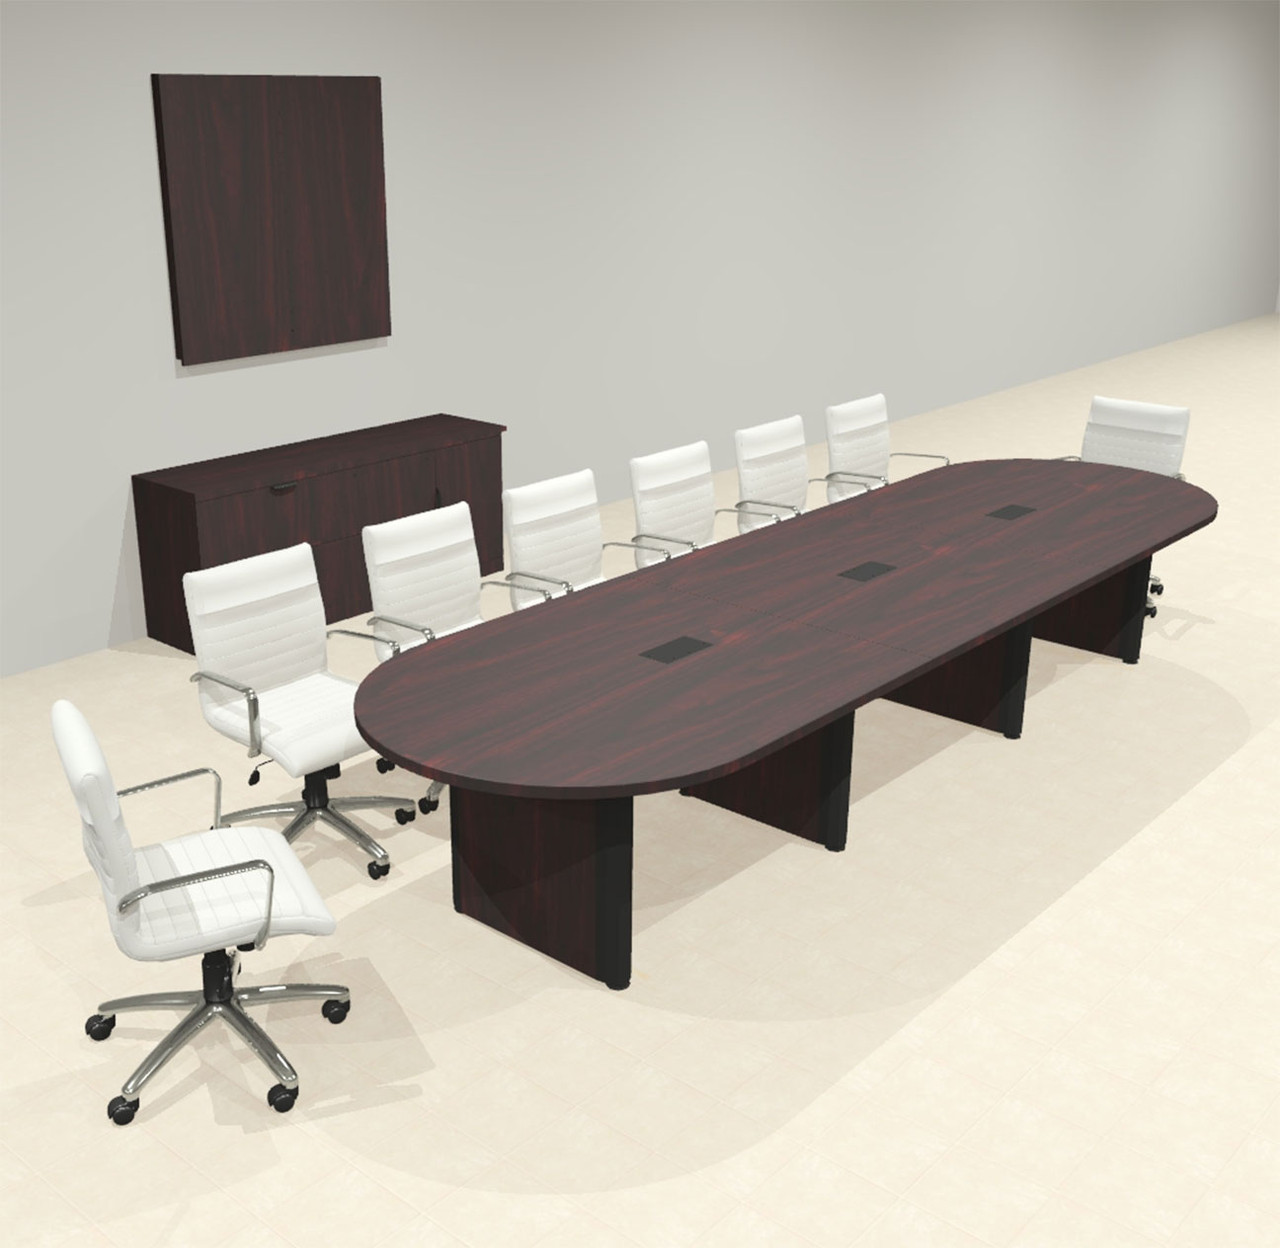 Racetrack Cable Management 14' Feet Conference Table, #OF-CON-CRP22